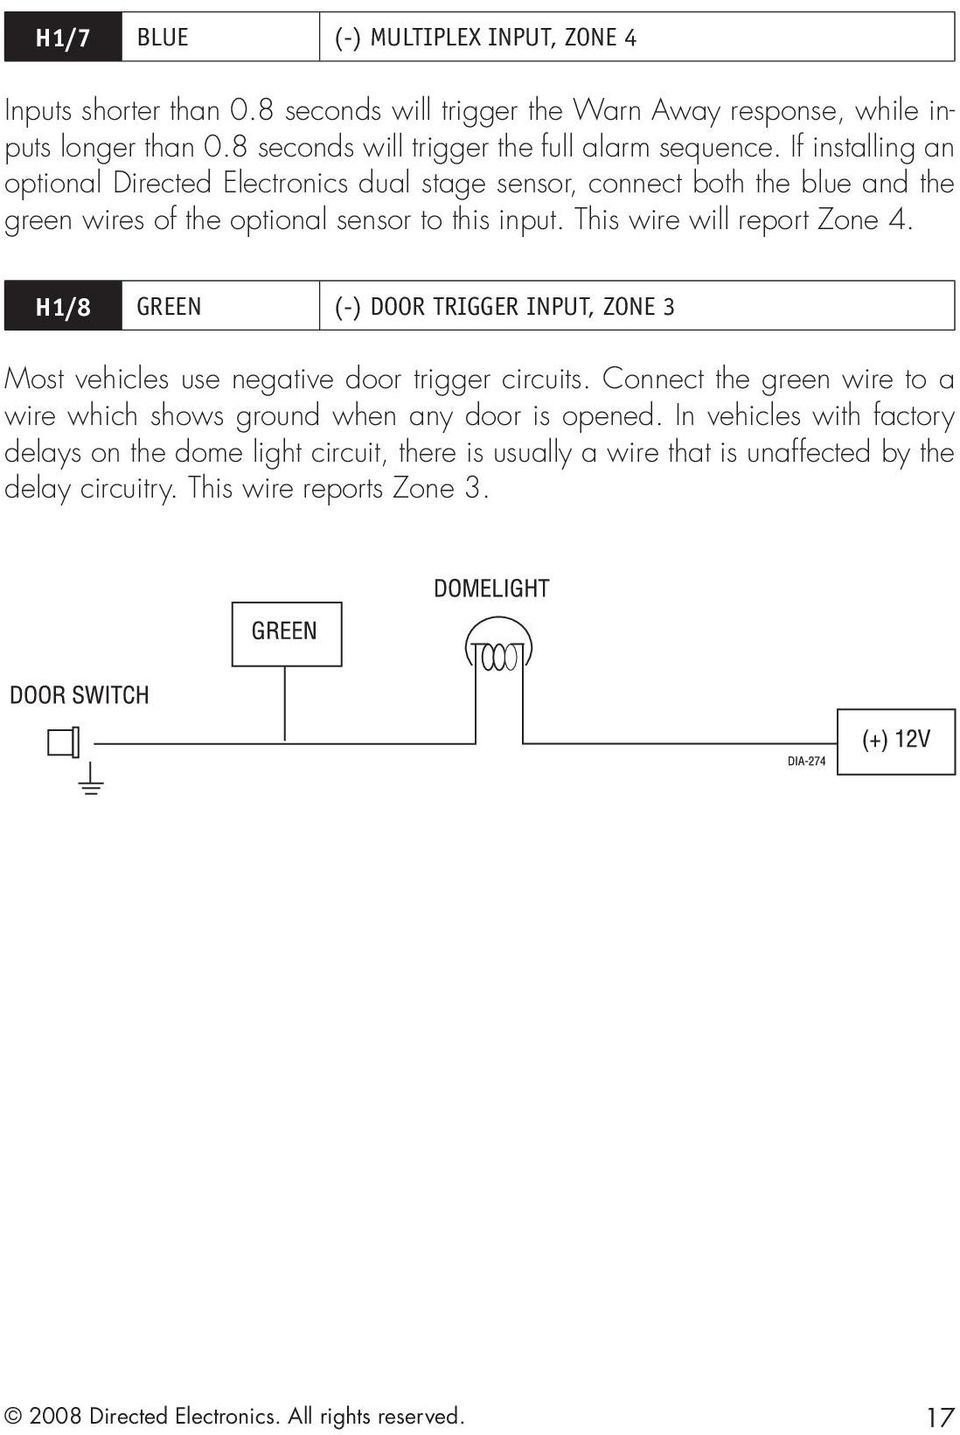 H1/8 GREEN (-) DOOR TRIGGER INPUT, ZONE 3 Most vehicles use negative door trigger circuits. Connect the green wire to a wire which shows ground when any door is opened.